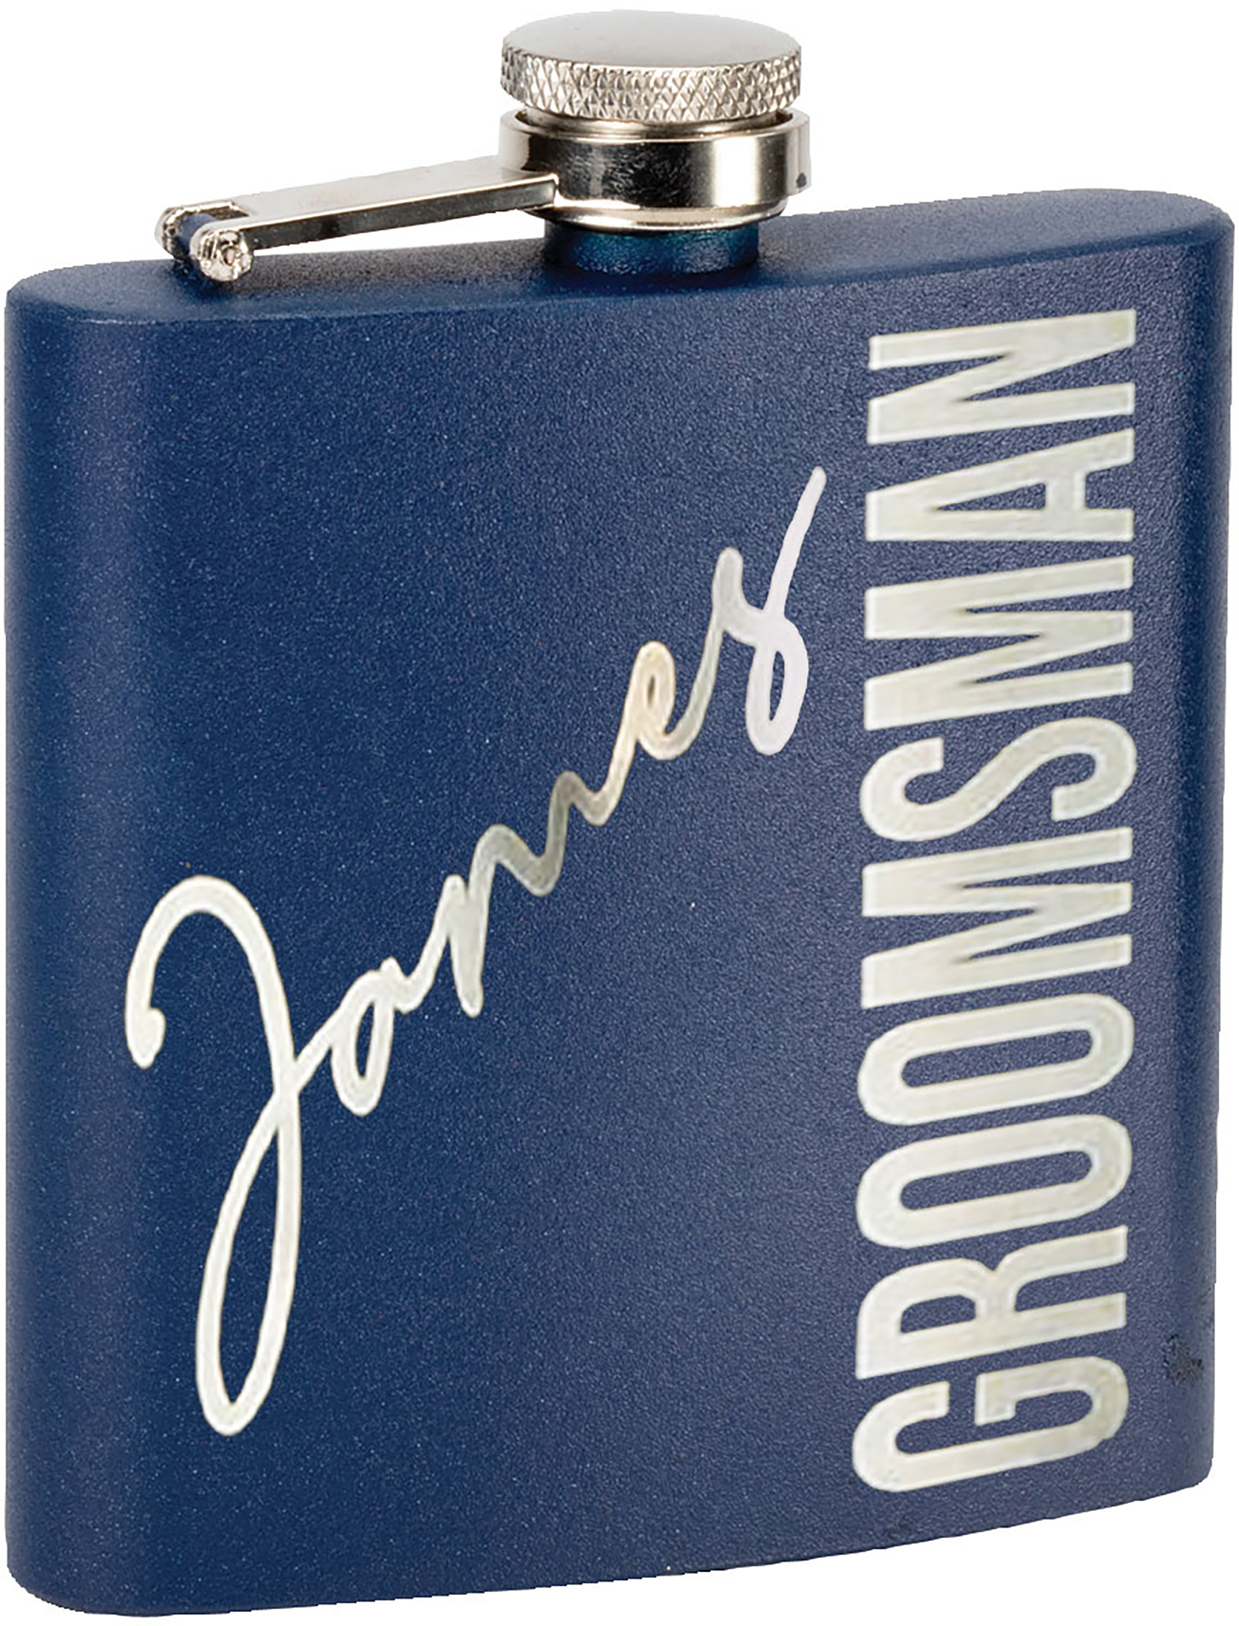 Tahoe© Powder Coated Insulated 6 oz Flask - Navy